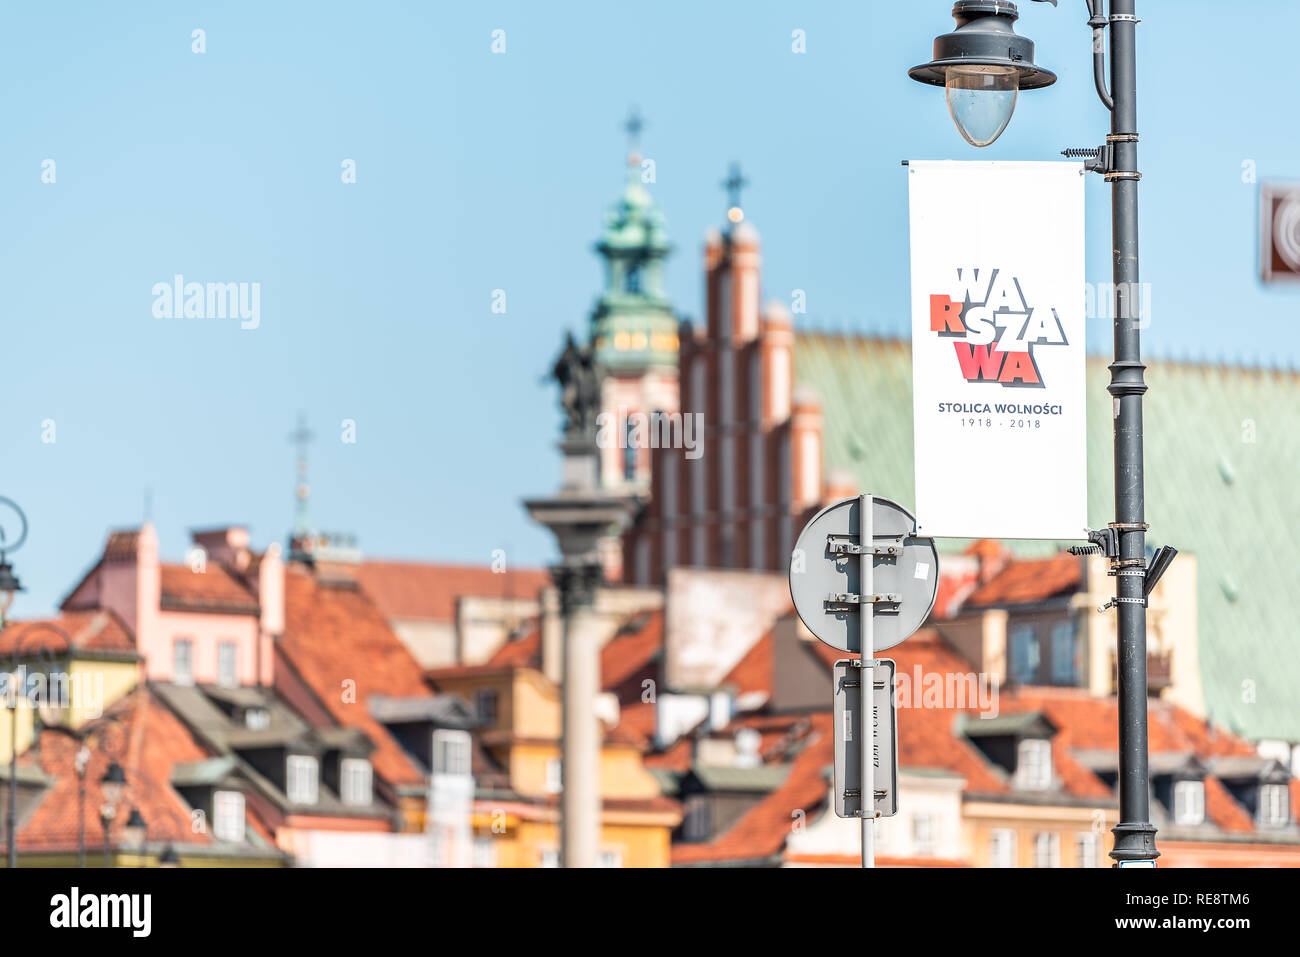 Warsaw, Poland - August 23, 2018: Famous old town Castle Square tower in capital city during sunny summer day cityscape and closeup of sign for Warsza Stock Photo